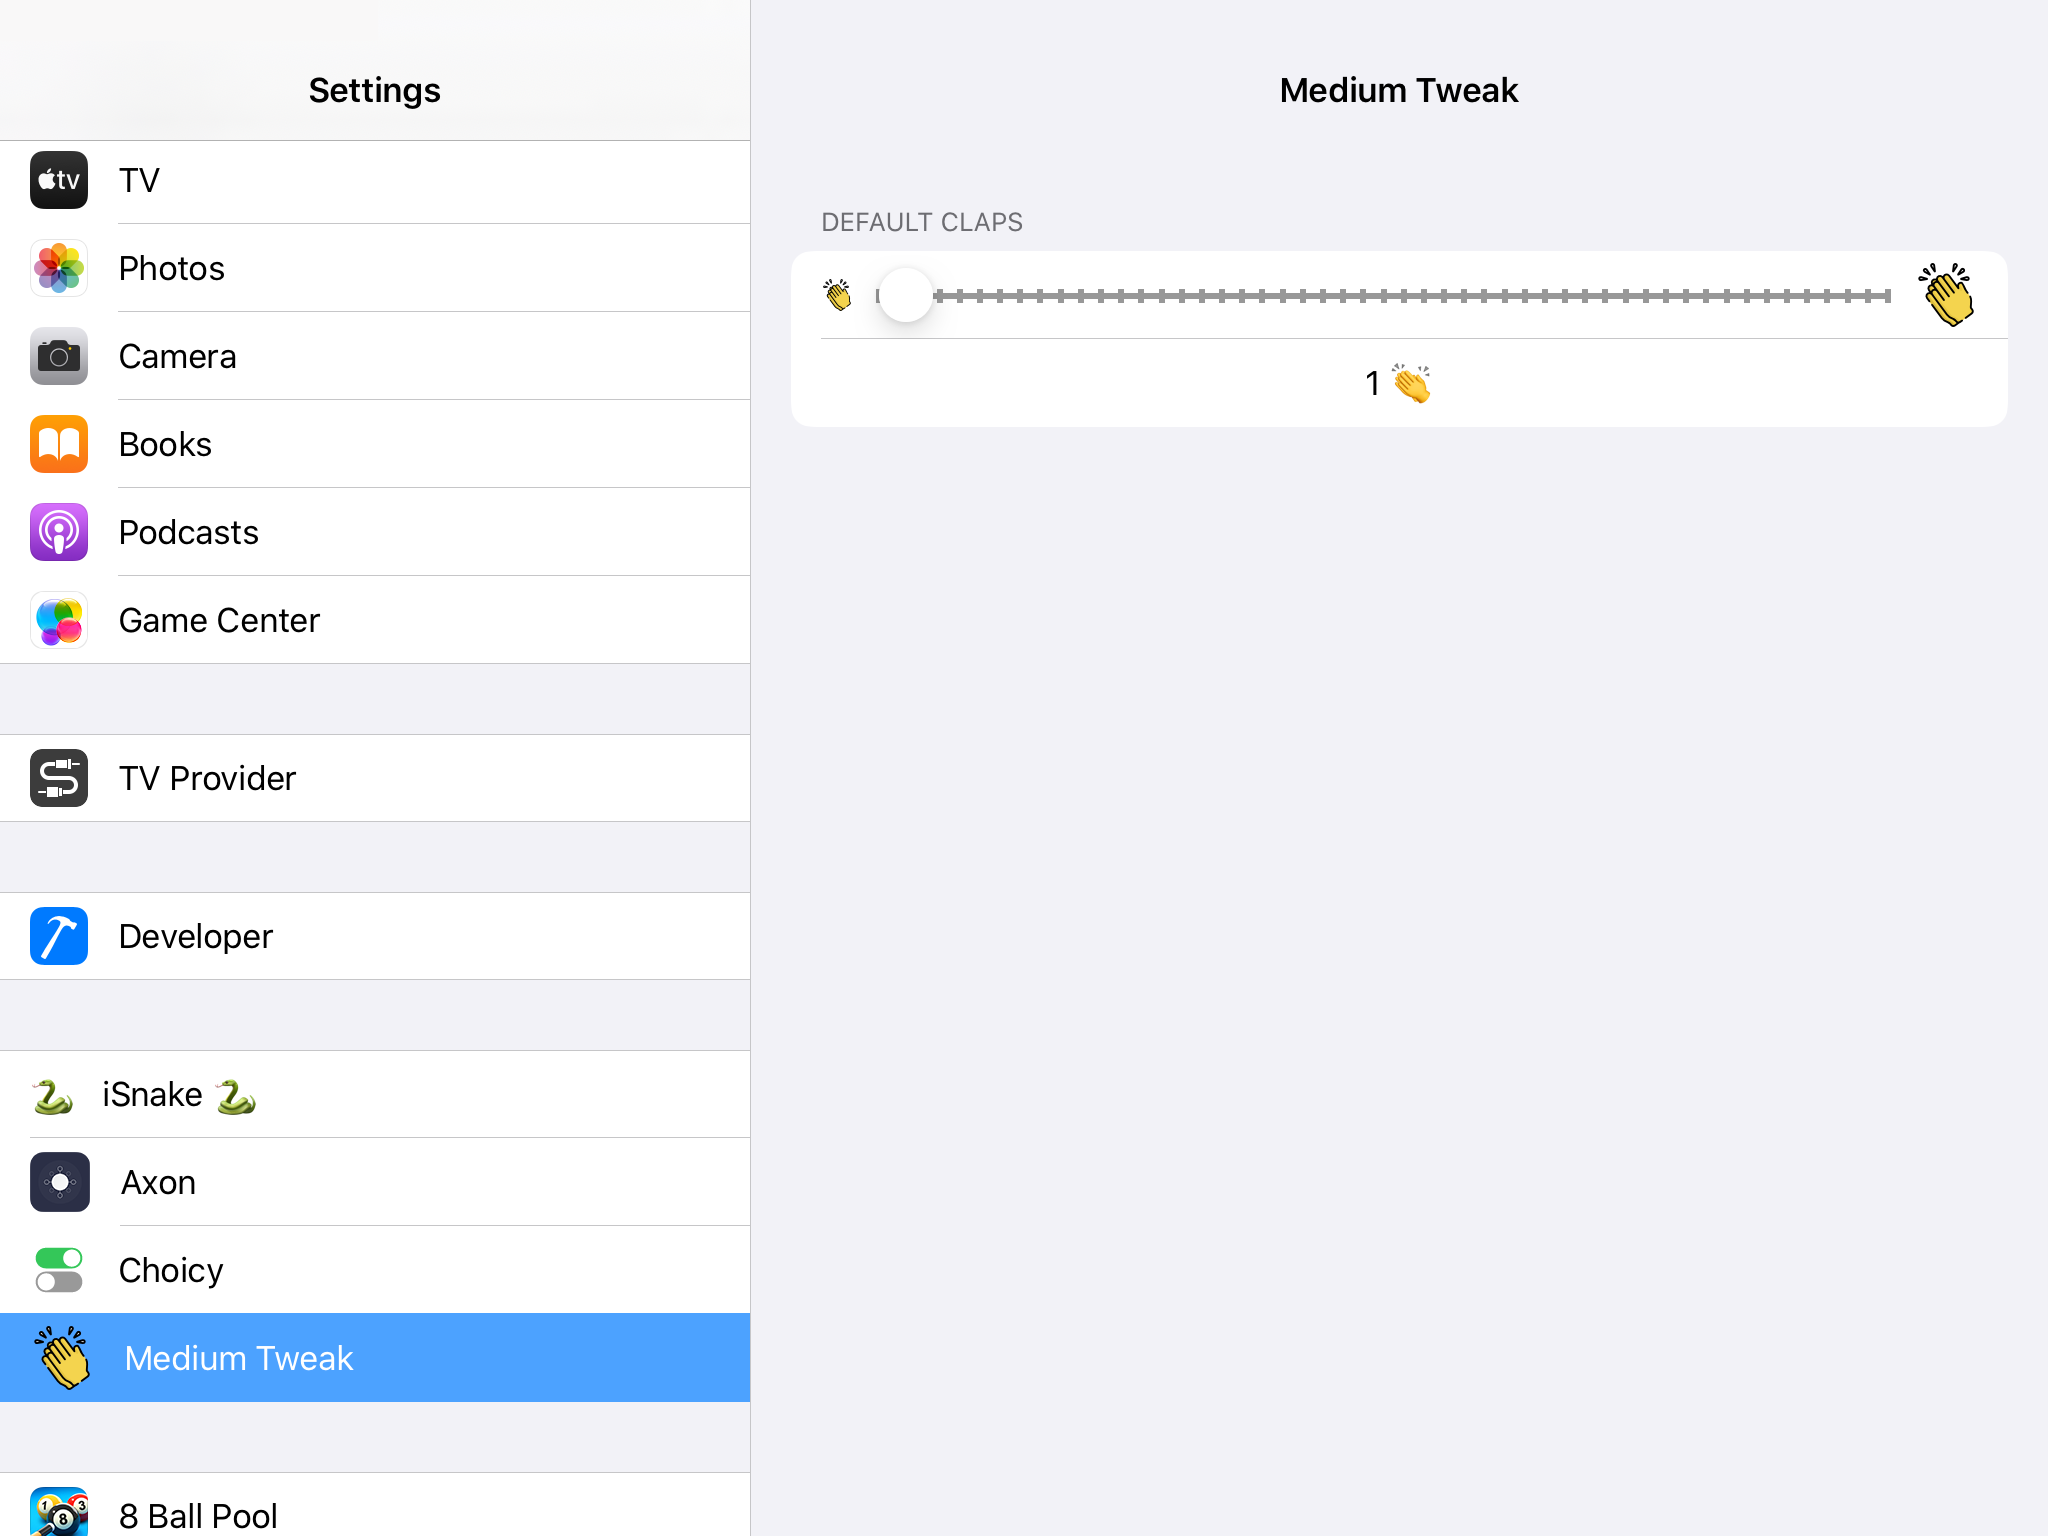 Medium Tweak Preference with static cell